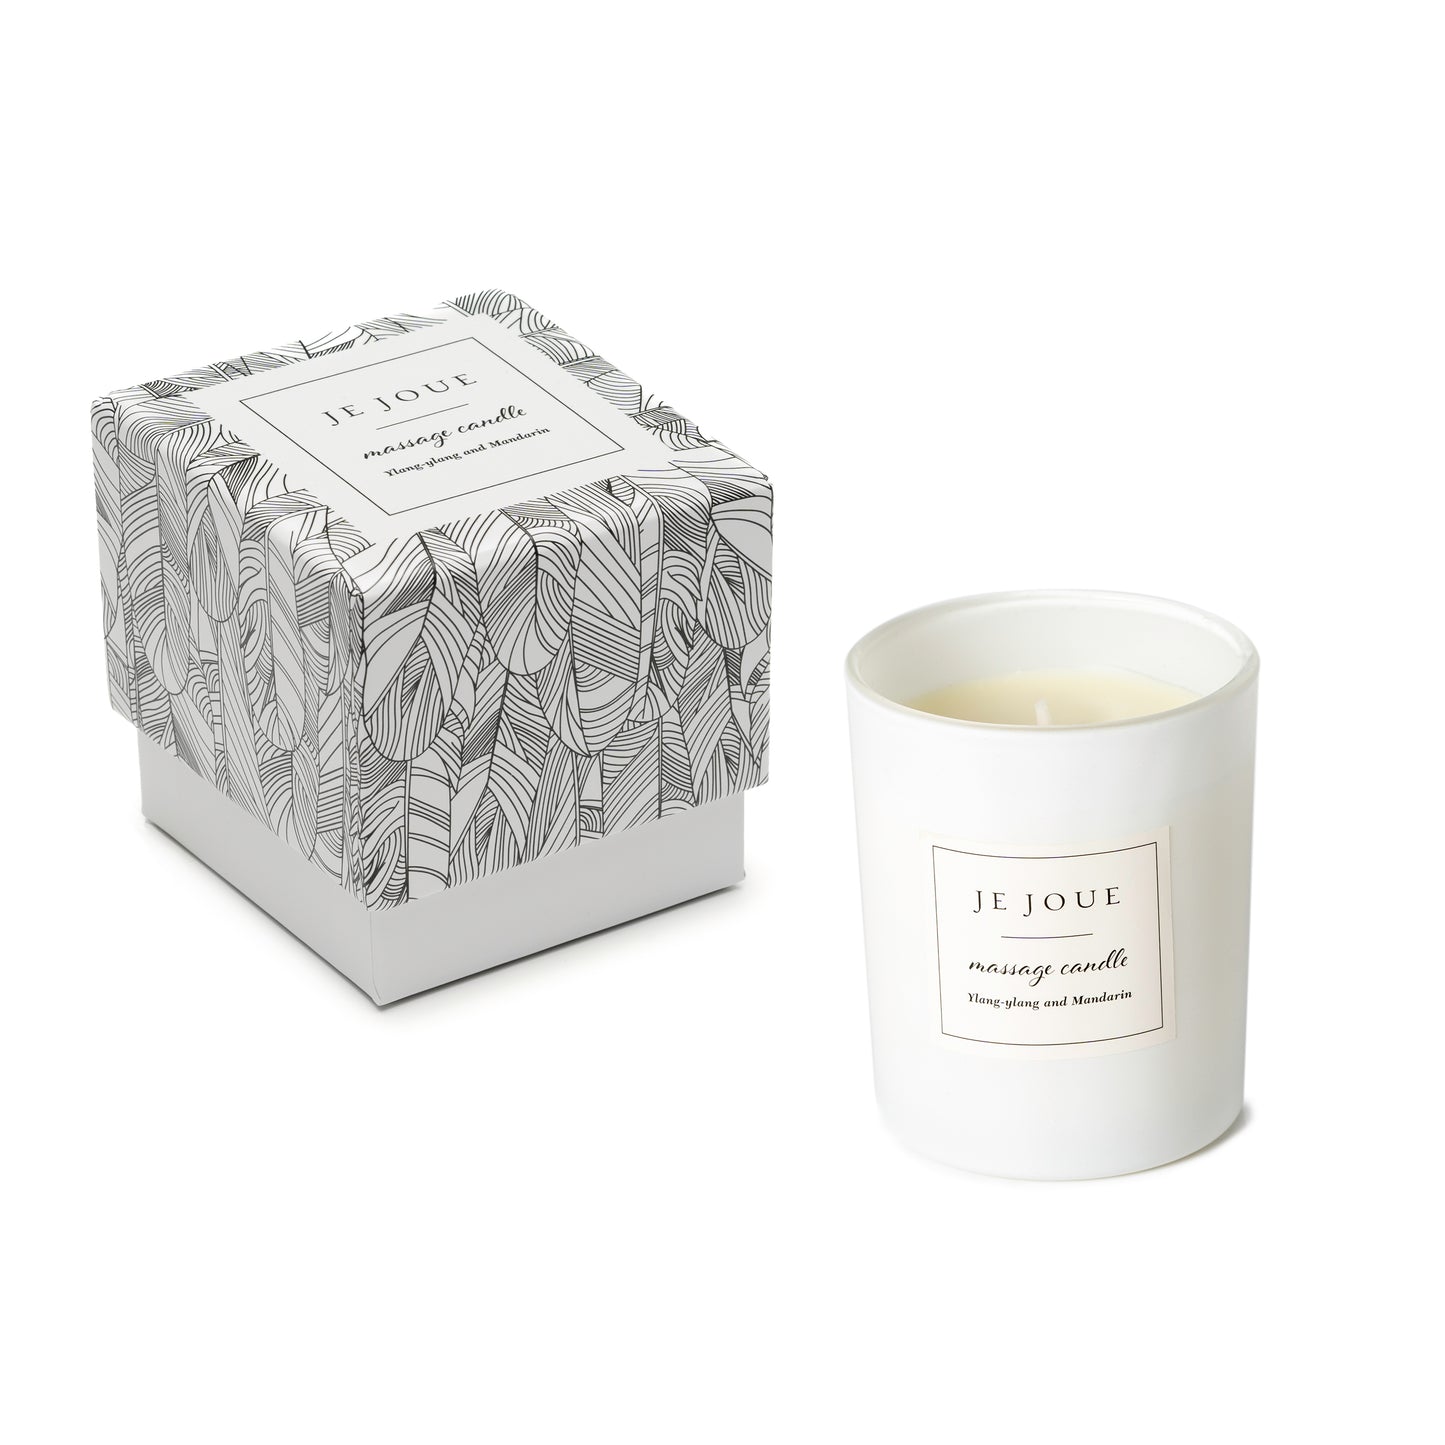 Je Joue Massage Candle with box